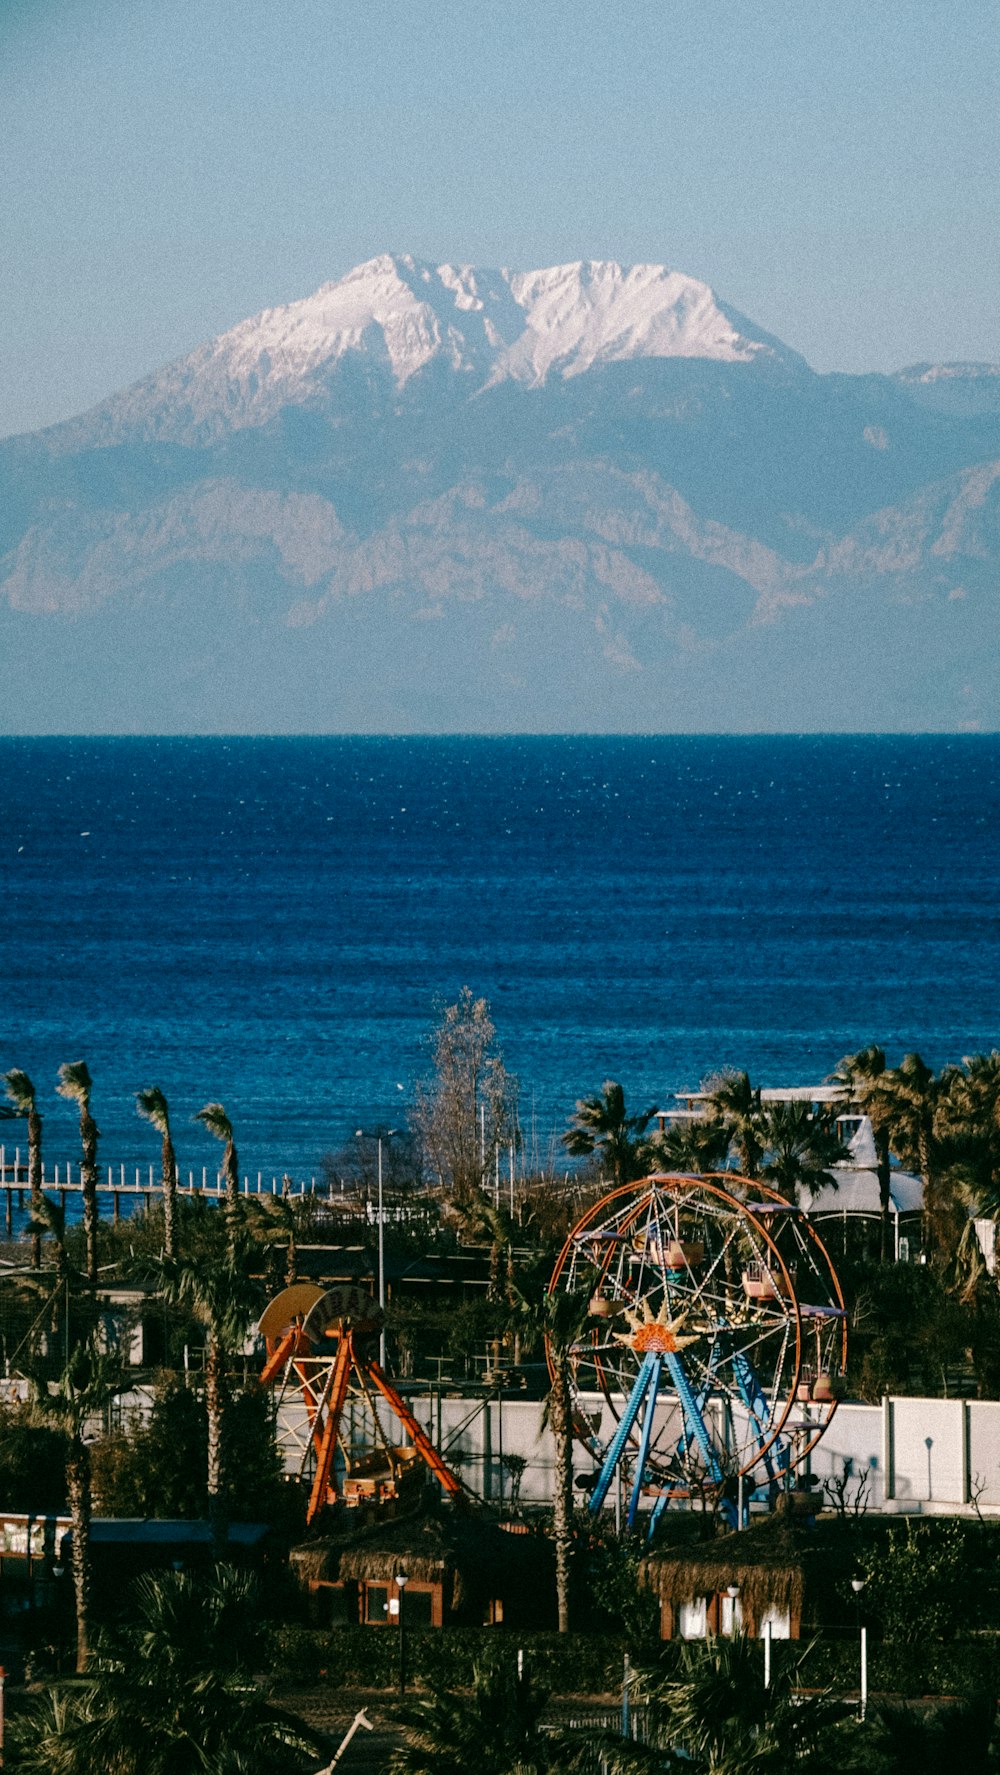 a view of a mountain with a ferris wheel in the foreground